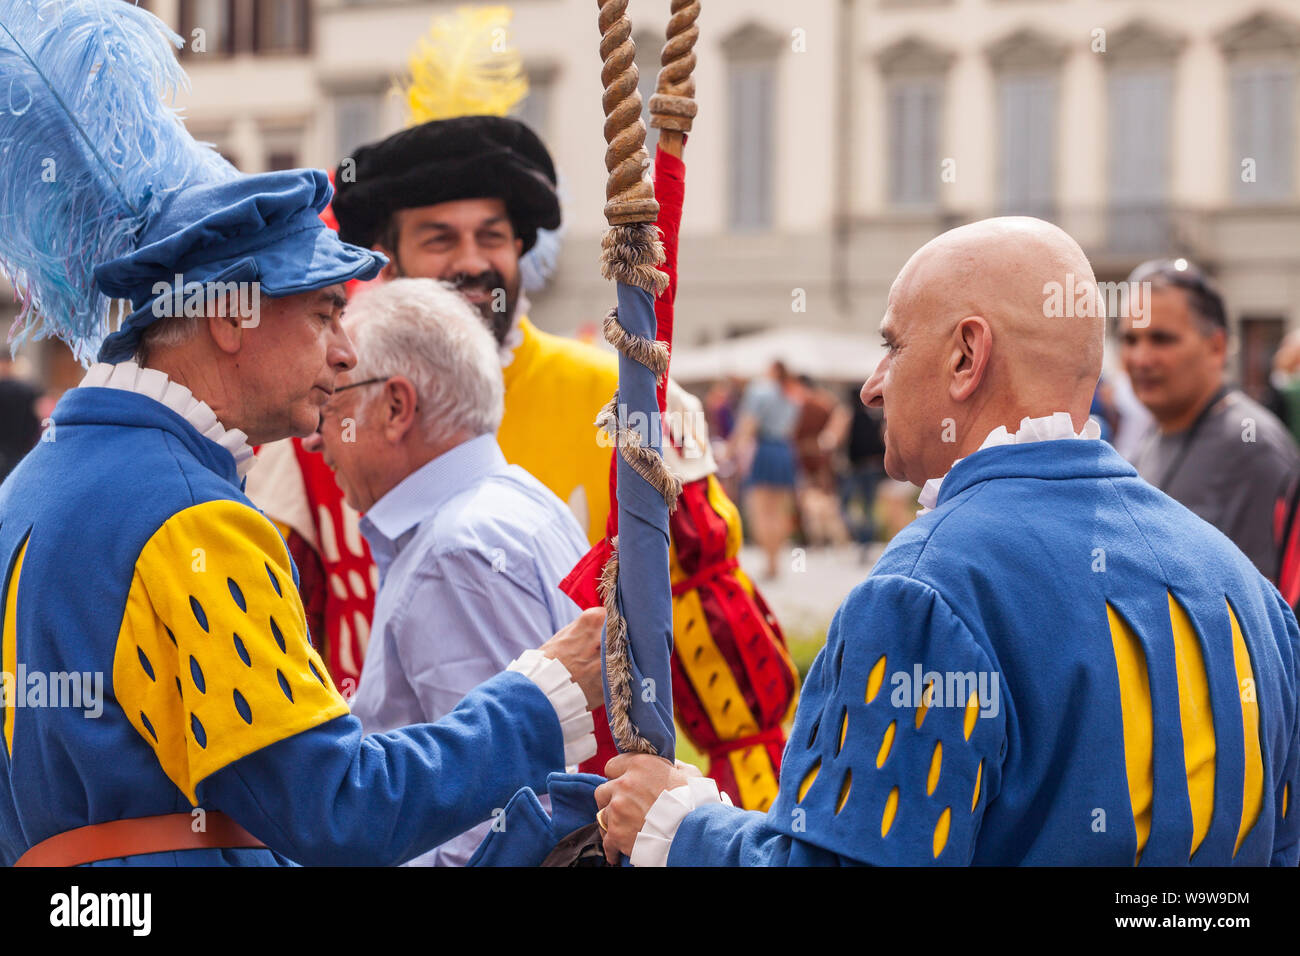 Traditional costumes at the Calcio Storico parade in Florence, Italy. Also known as Calcio Fiorentino the game is thought to be an early form of moder Stock Photo